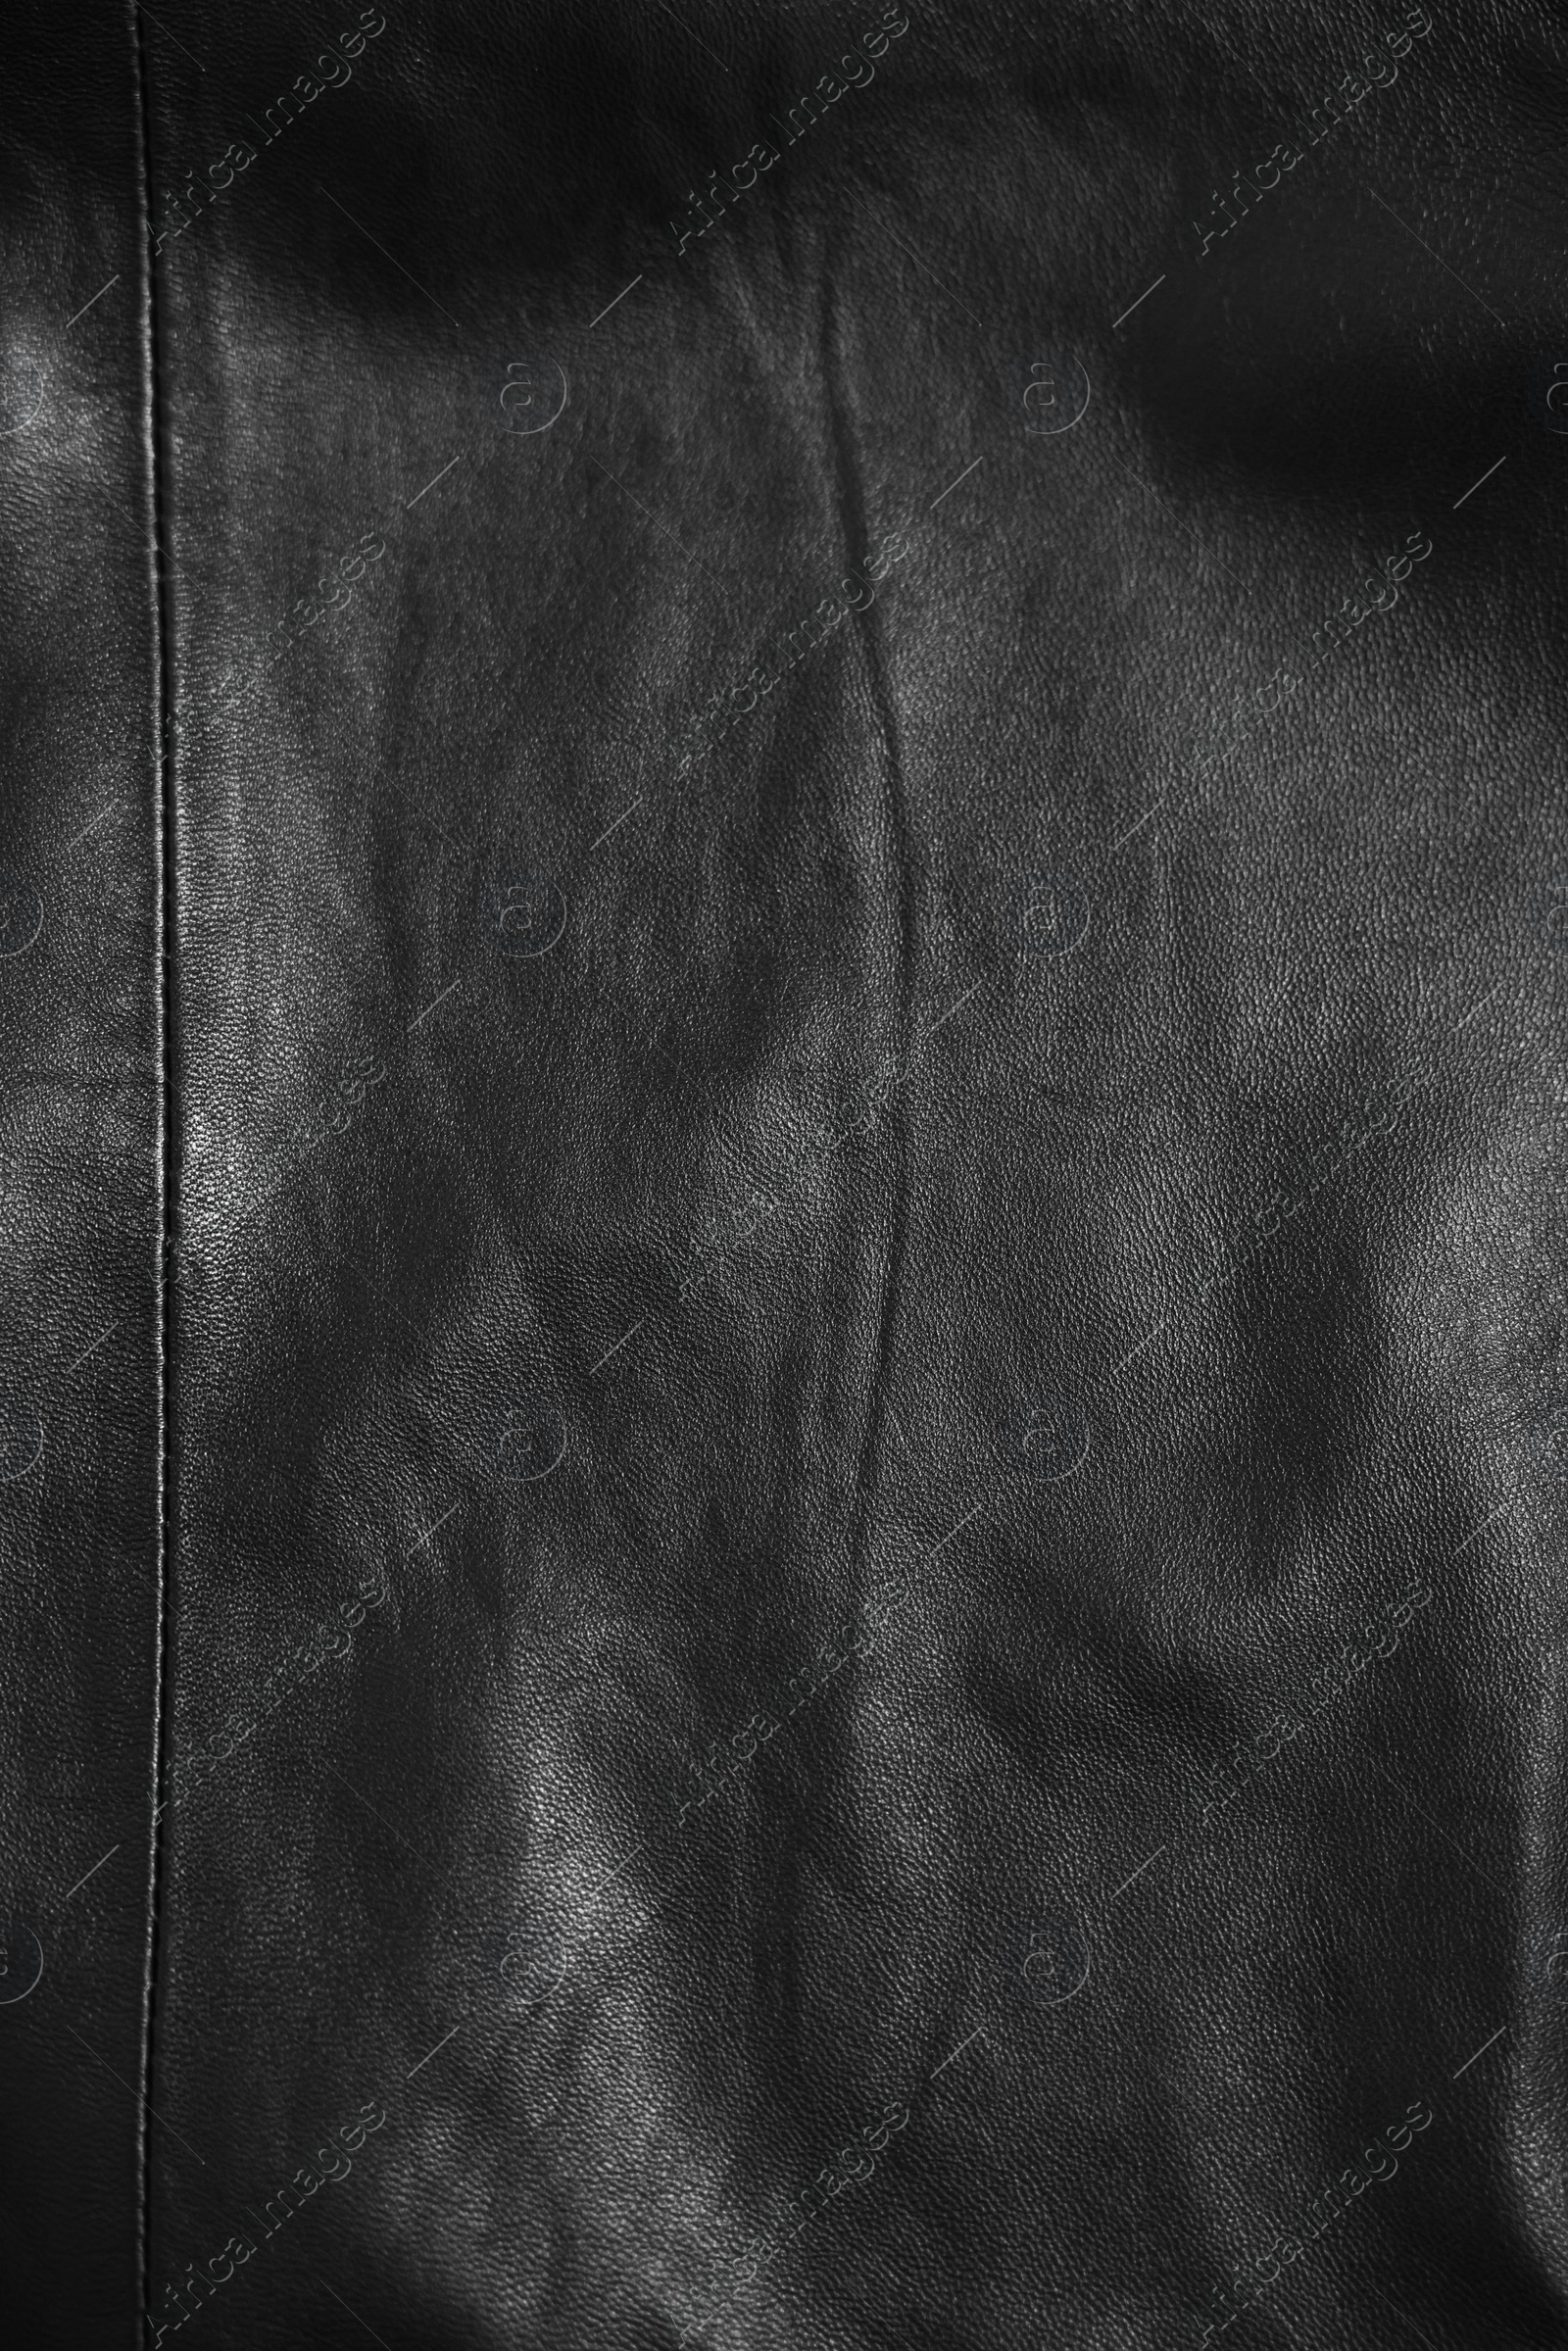 Photo of Texture of black leather as background, top view